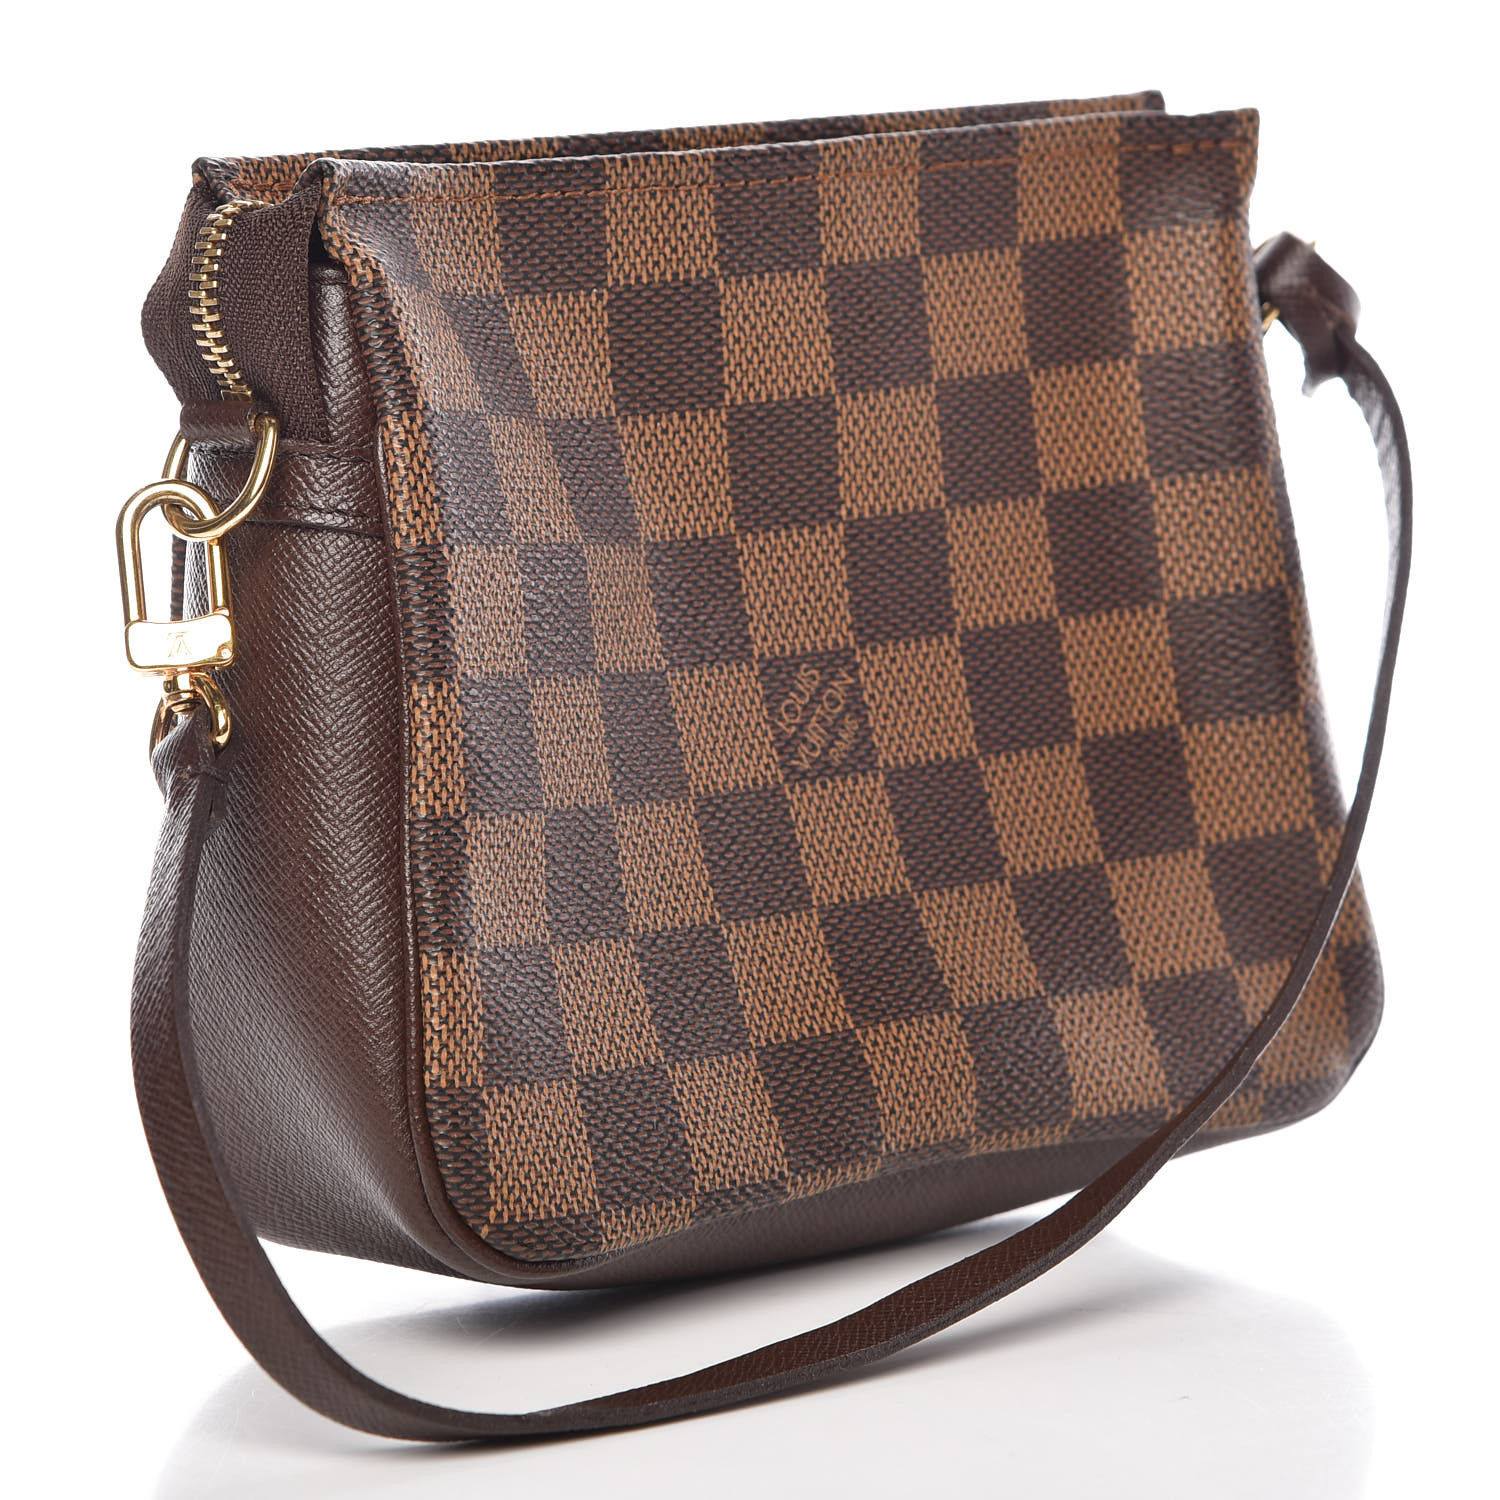 Sold at Auction: LOUIS VUITTON Monogram Trousse 28 Travel Cosmetic Pouch  (Re-lined)